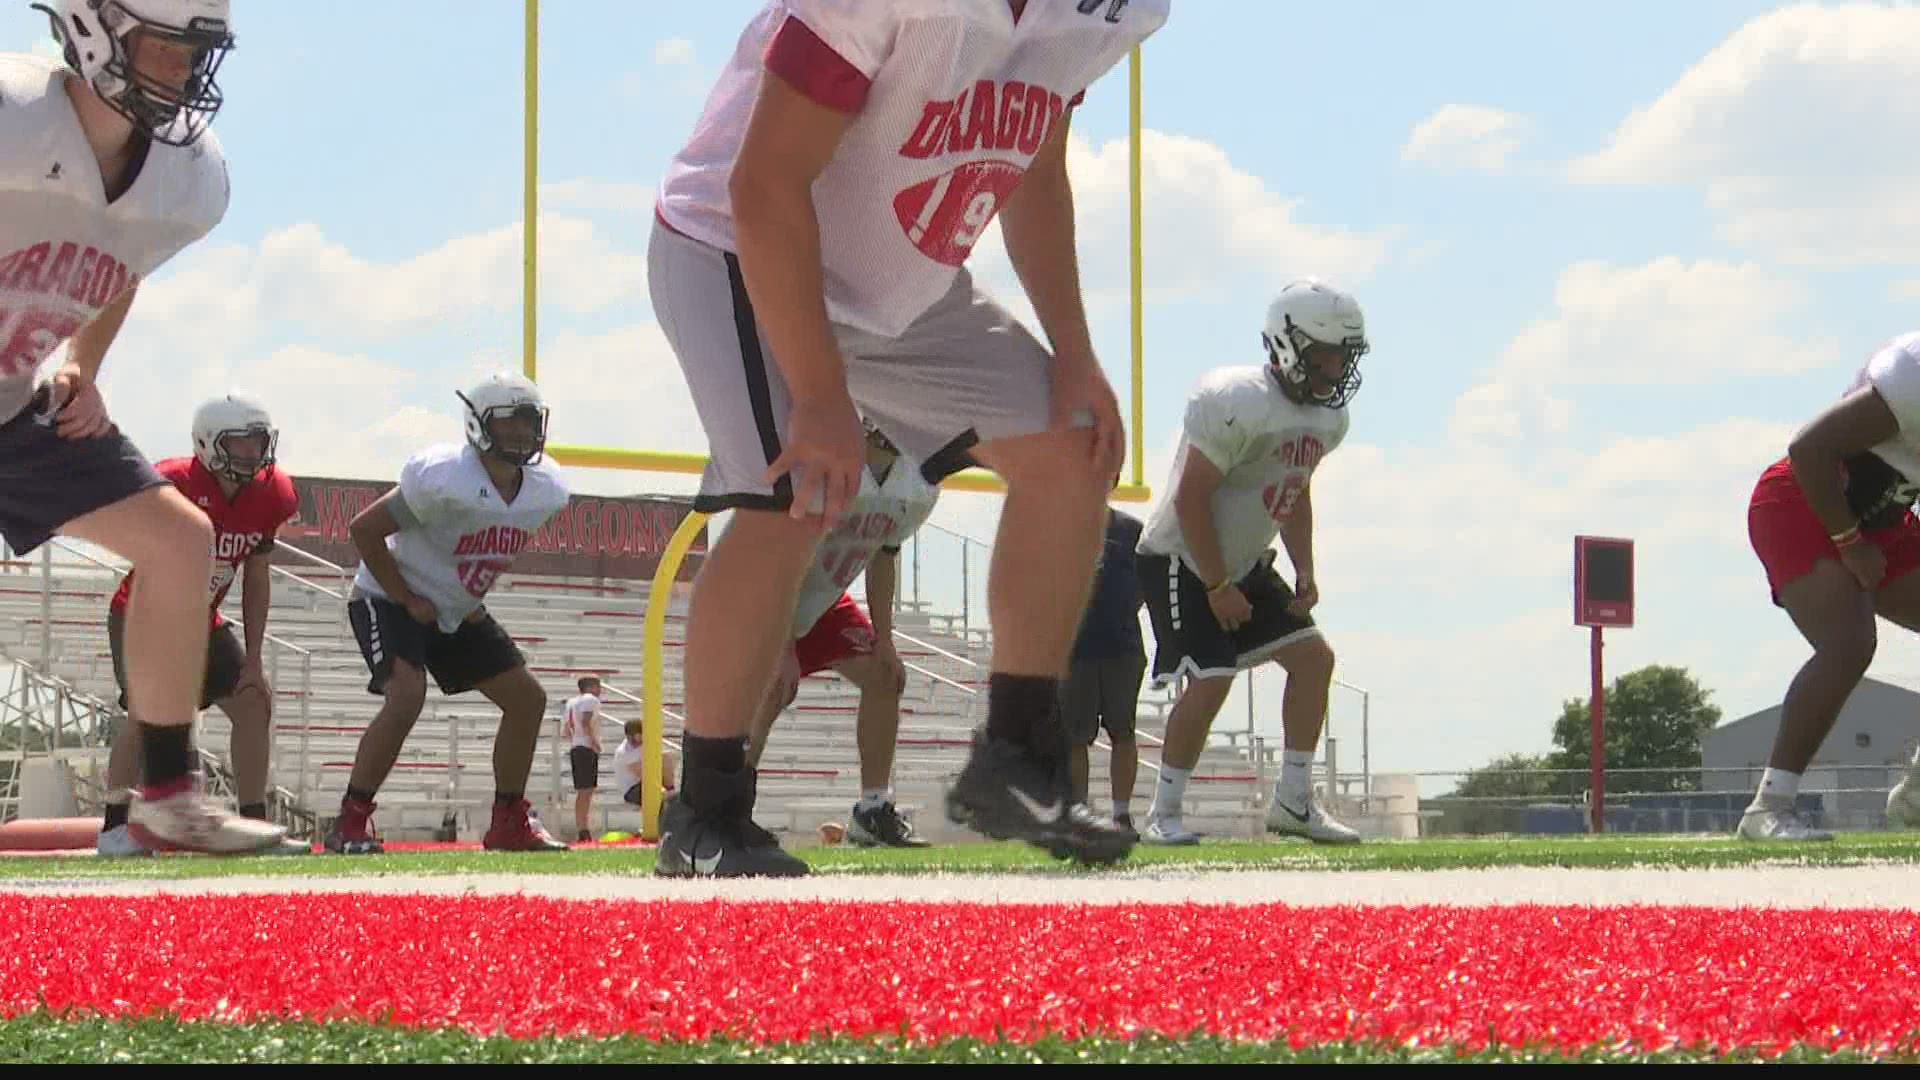 New Pal football players are back on the field, but they are also taking extra steps to be safe during the pandemic.